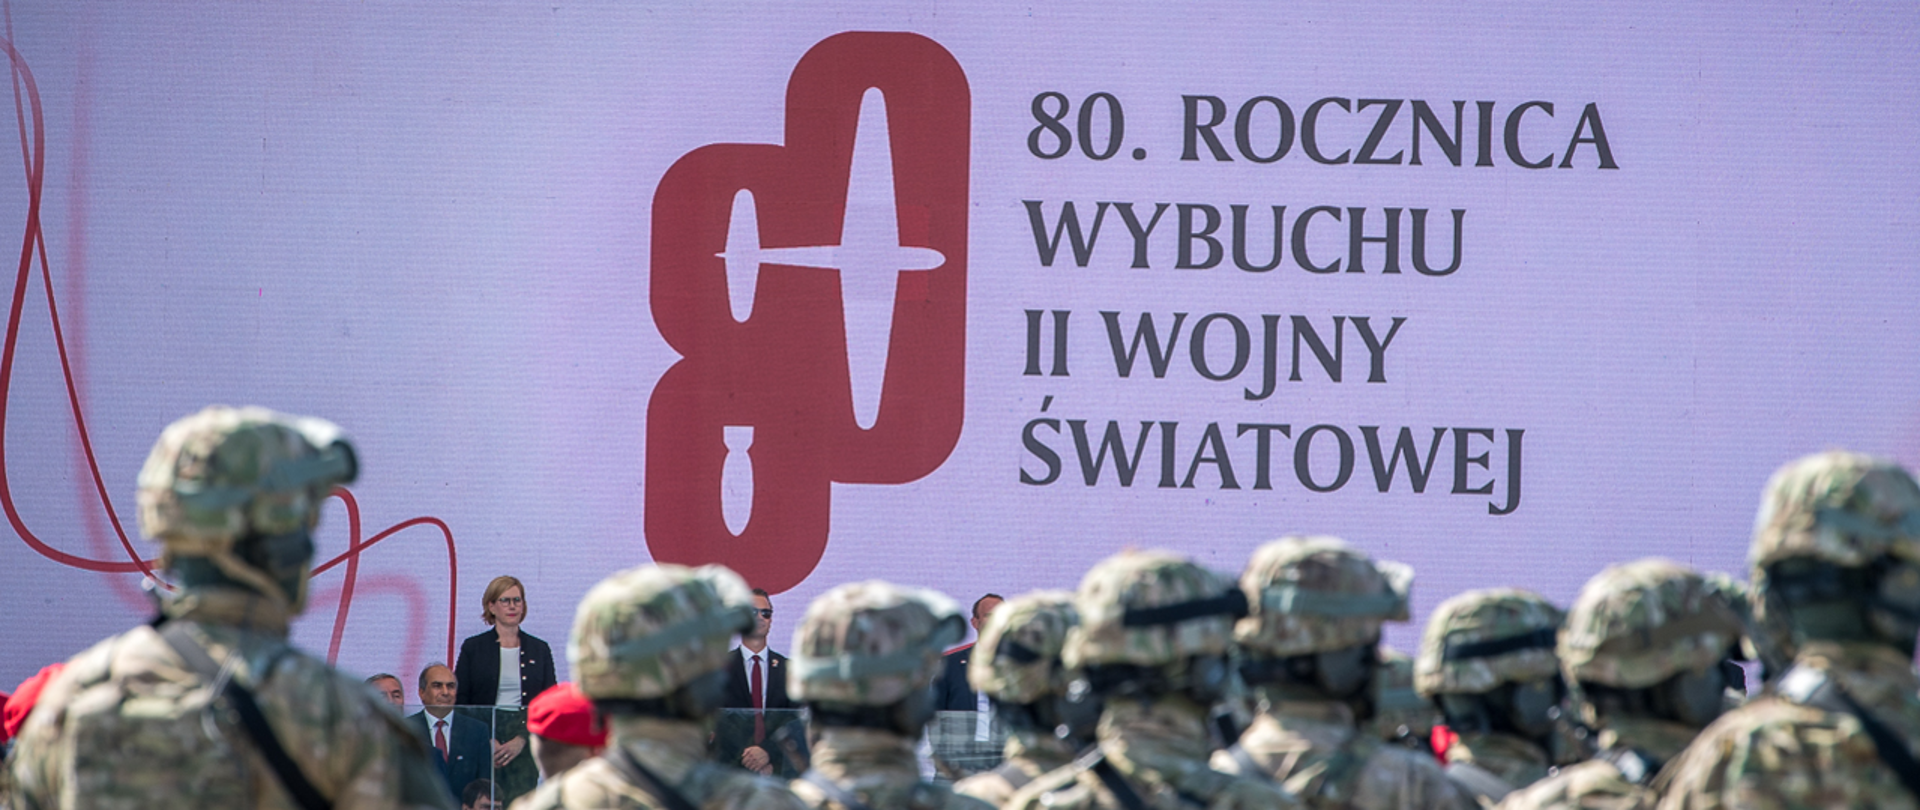 80th commemoration of WWII break out